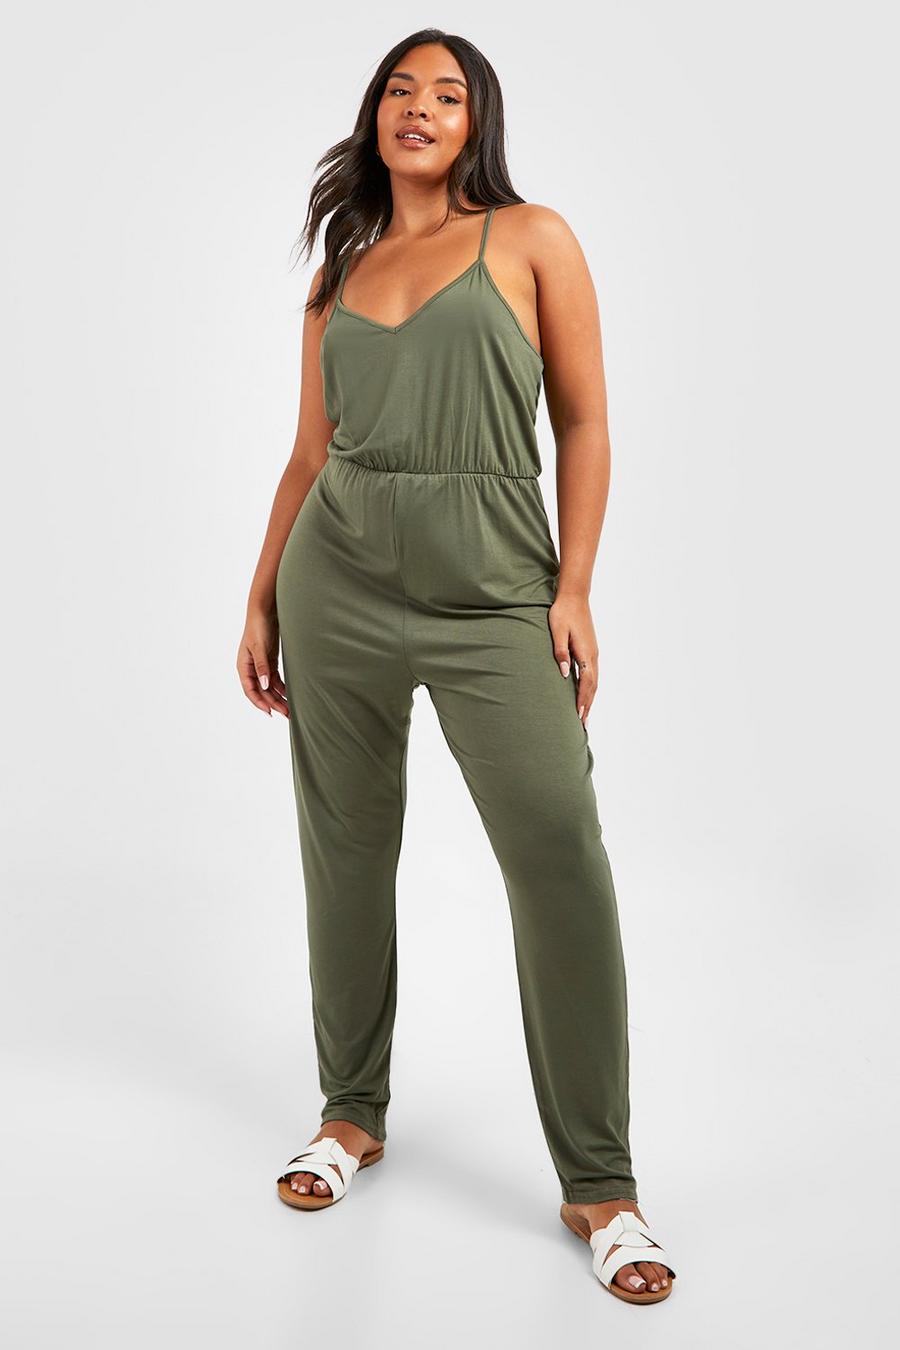 boohoo Plus Jersey Knit Basic Strappy Jumpsuit - Green - Size 24